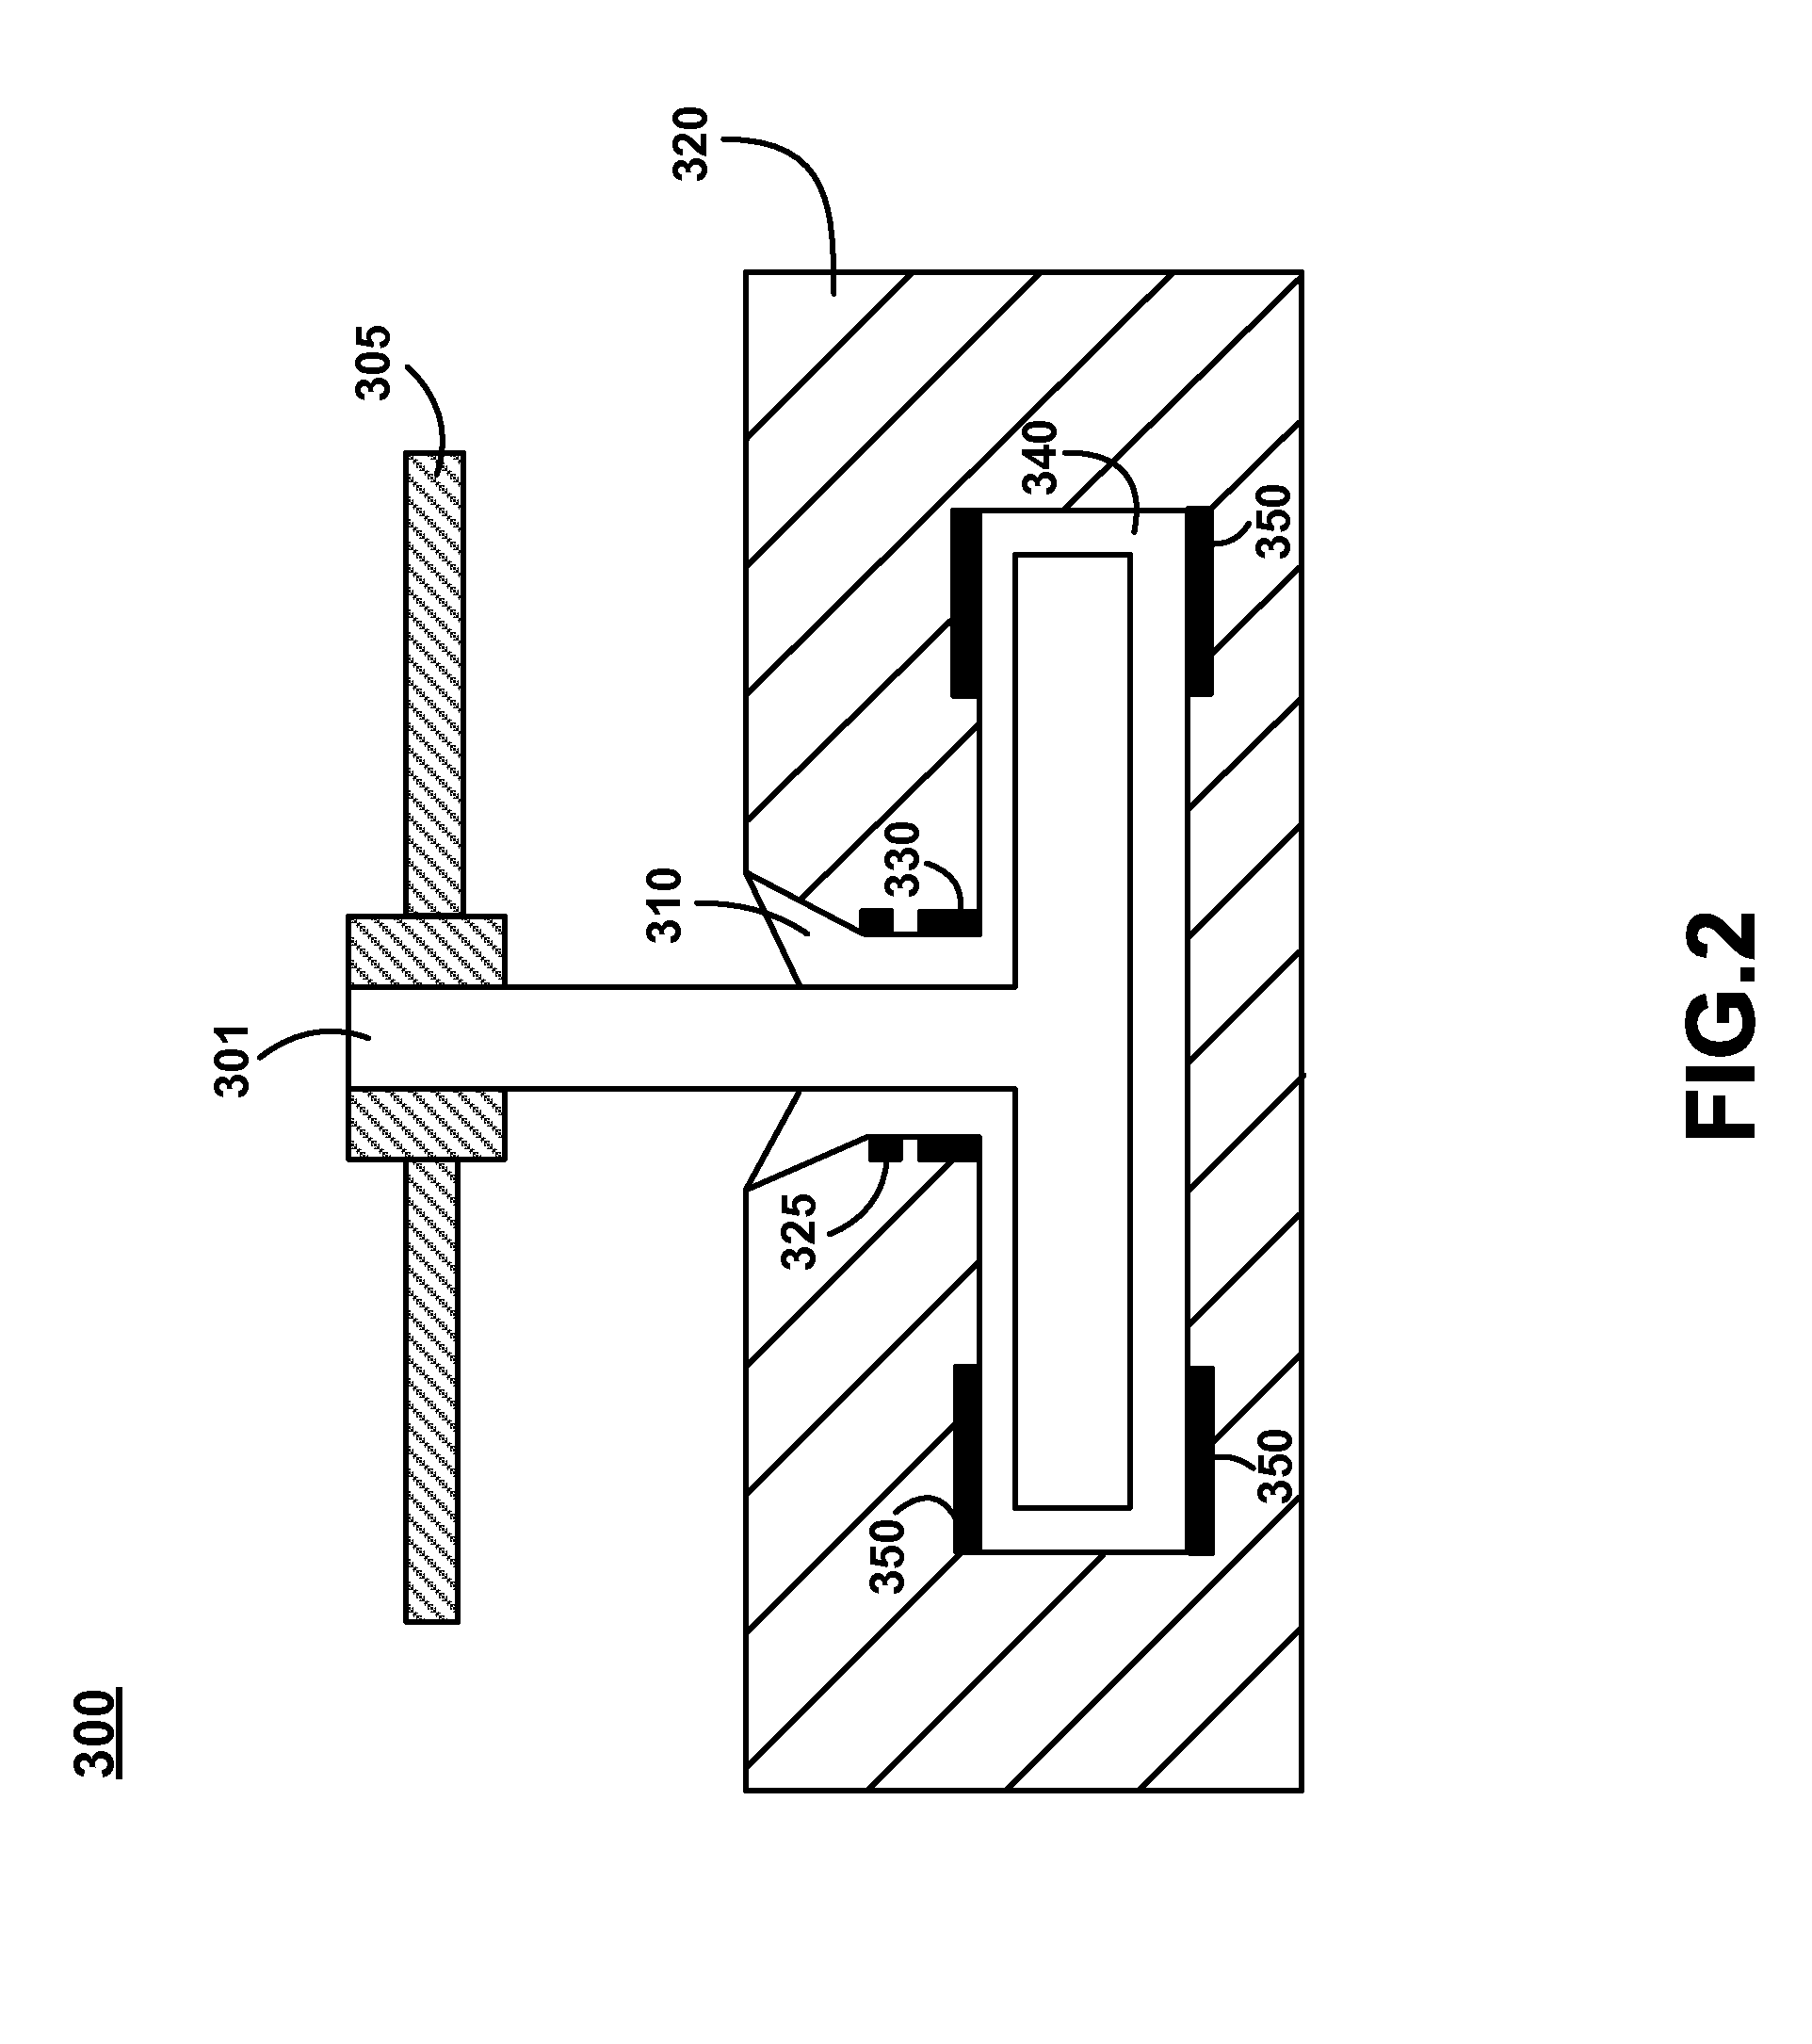 System and method to electrically ground fluid dynamic bearings